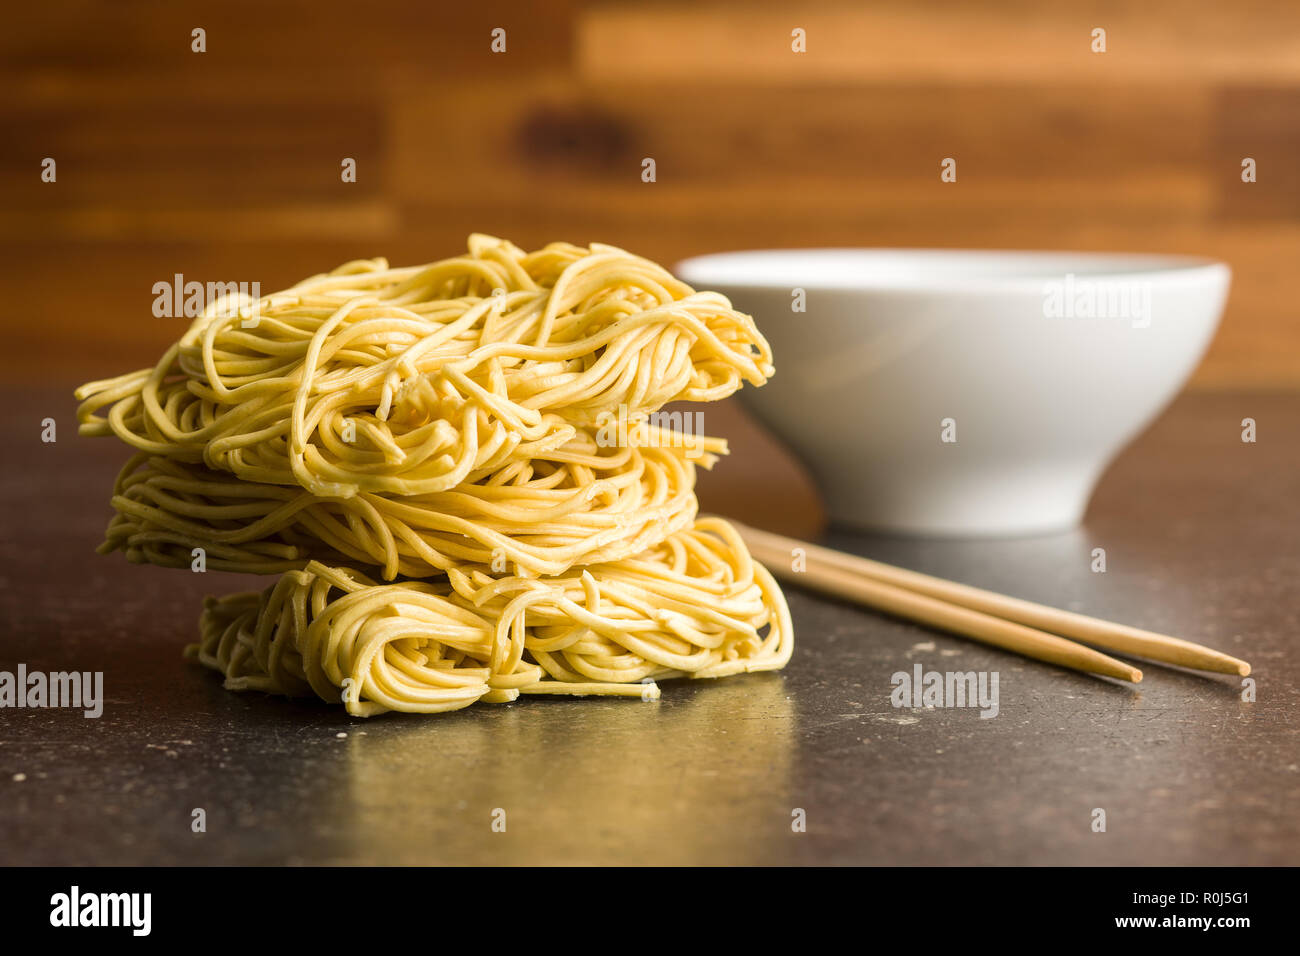 Uncooked instant chinese noodles on old kitchen table. Stock Photo